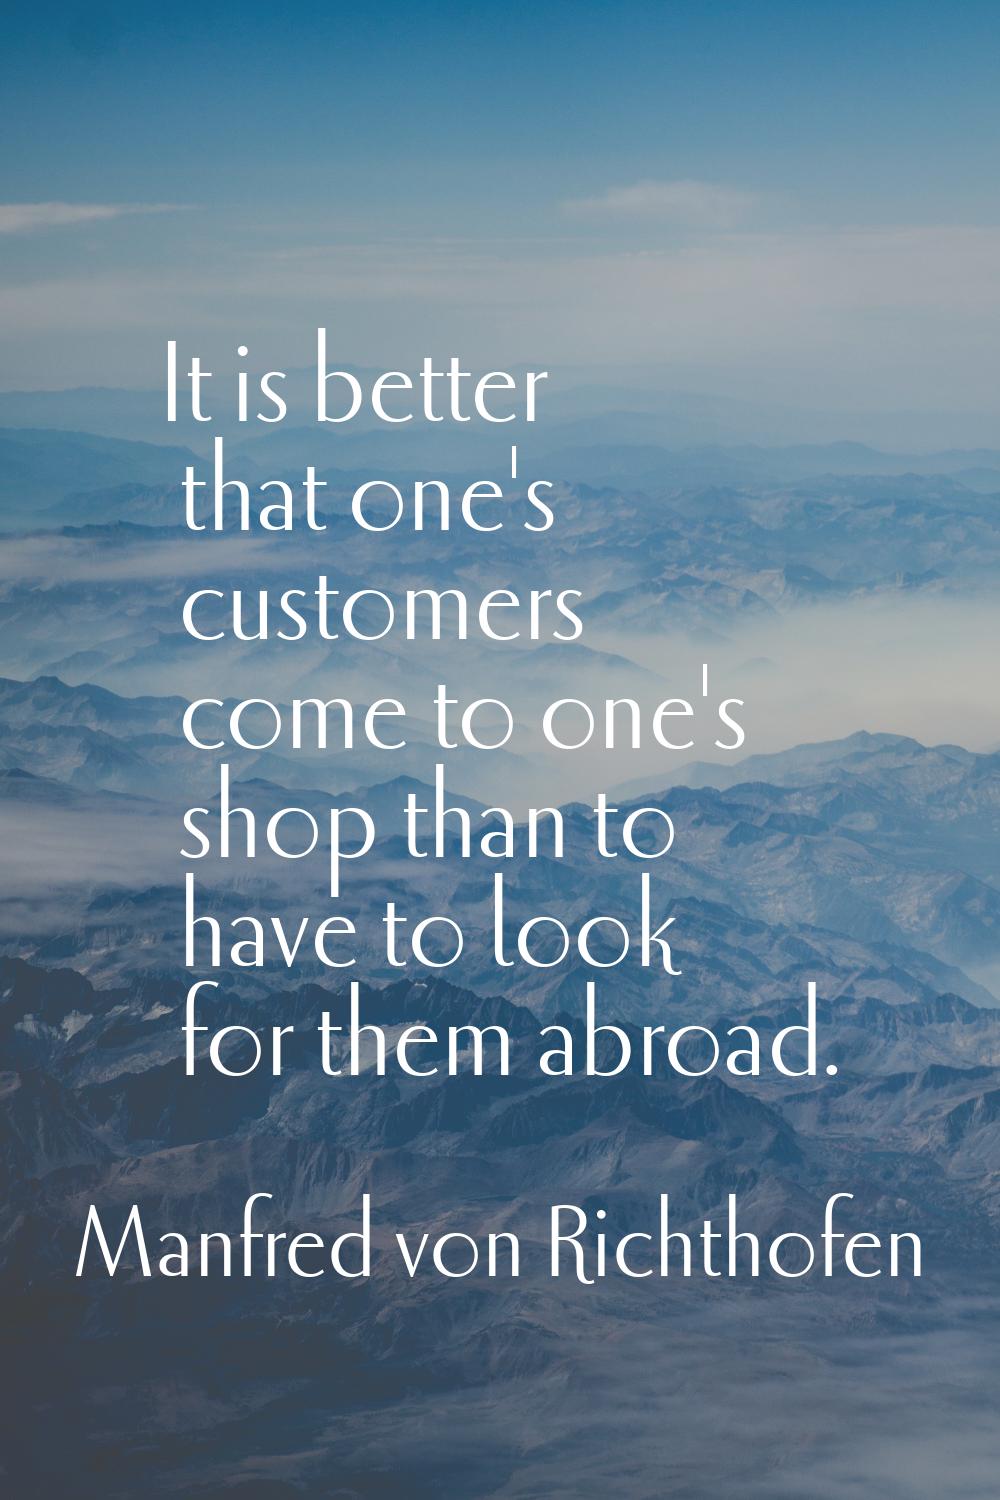 It is better that one's customers come to one's shop than to have to look for them abroad.